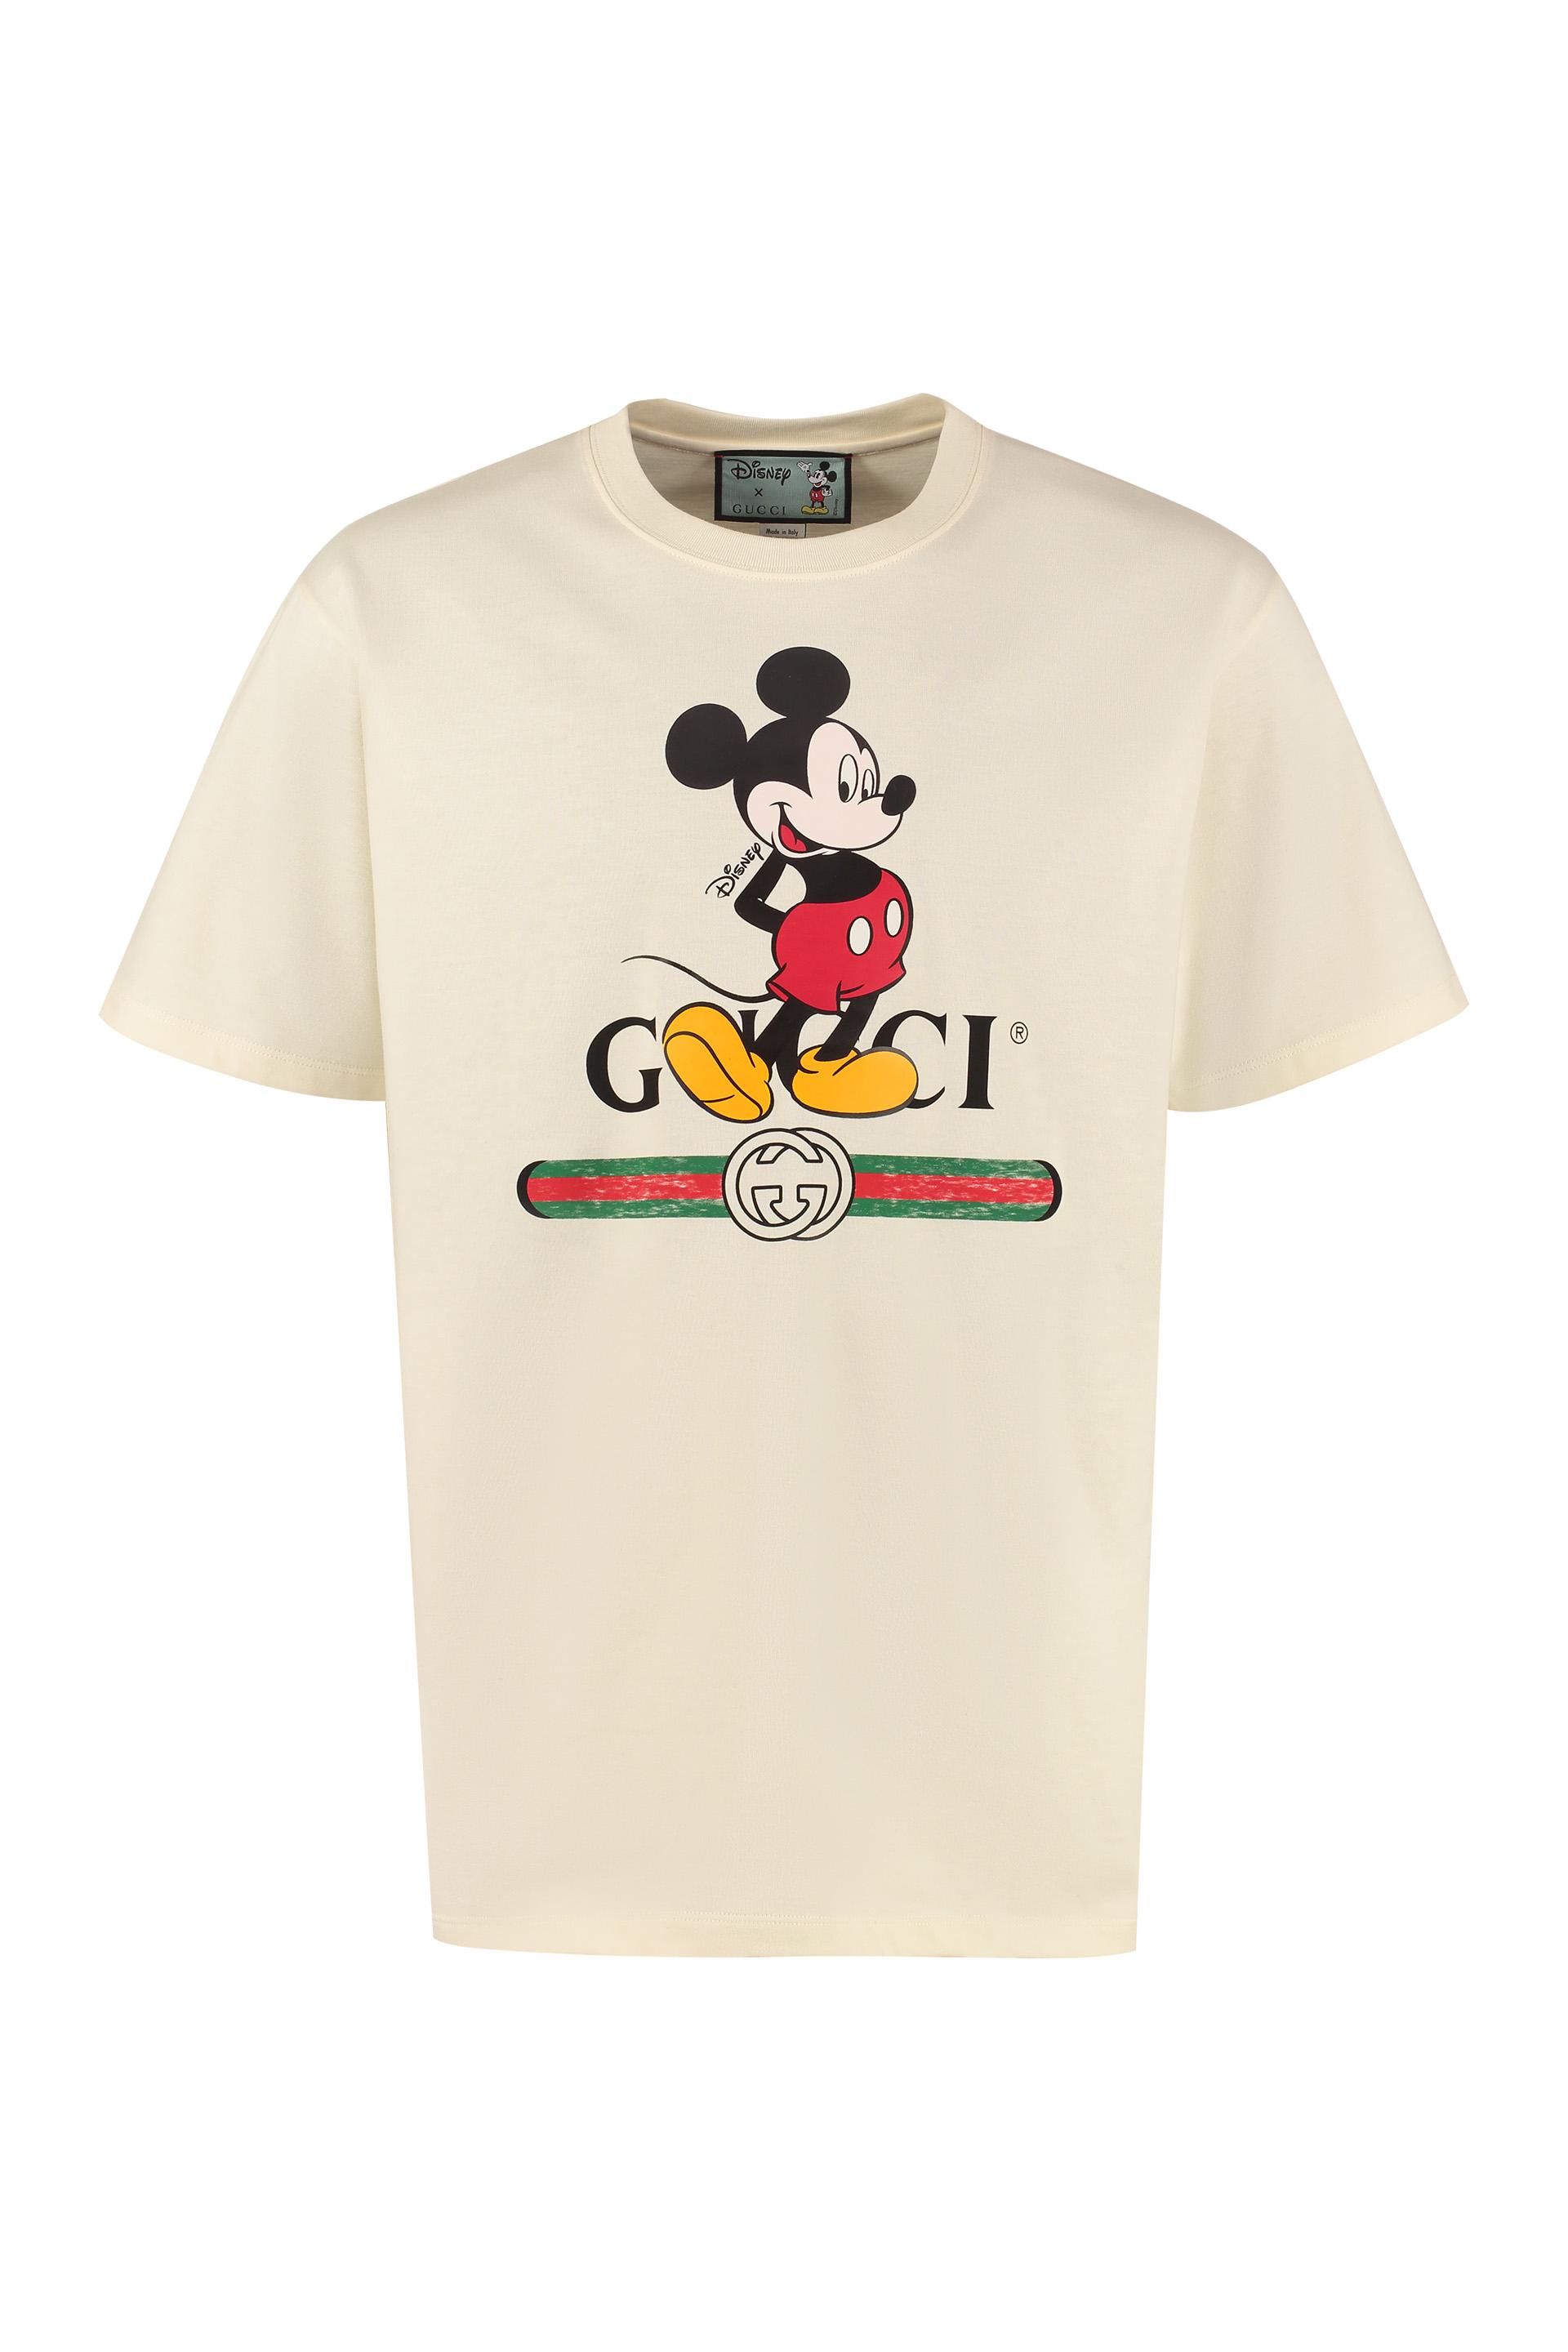 Gucci Cotton Disney X Oversize Tshirt in Natural for Men